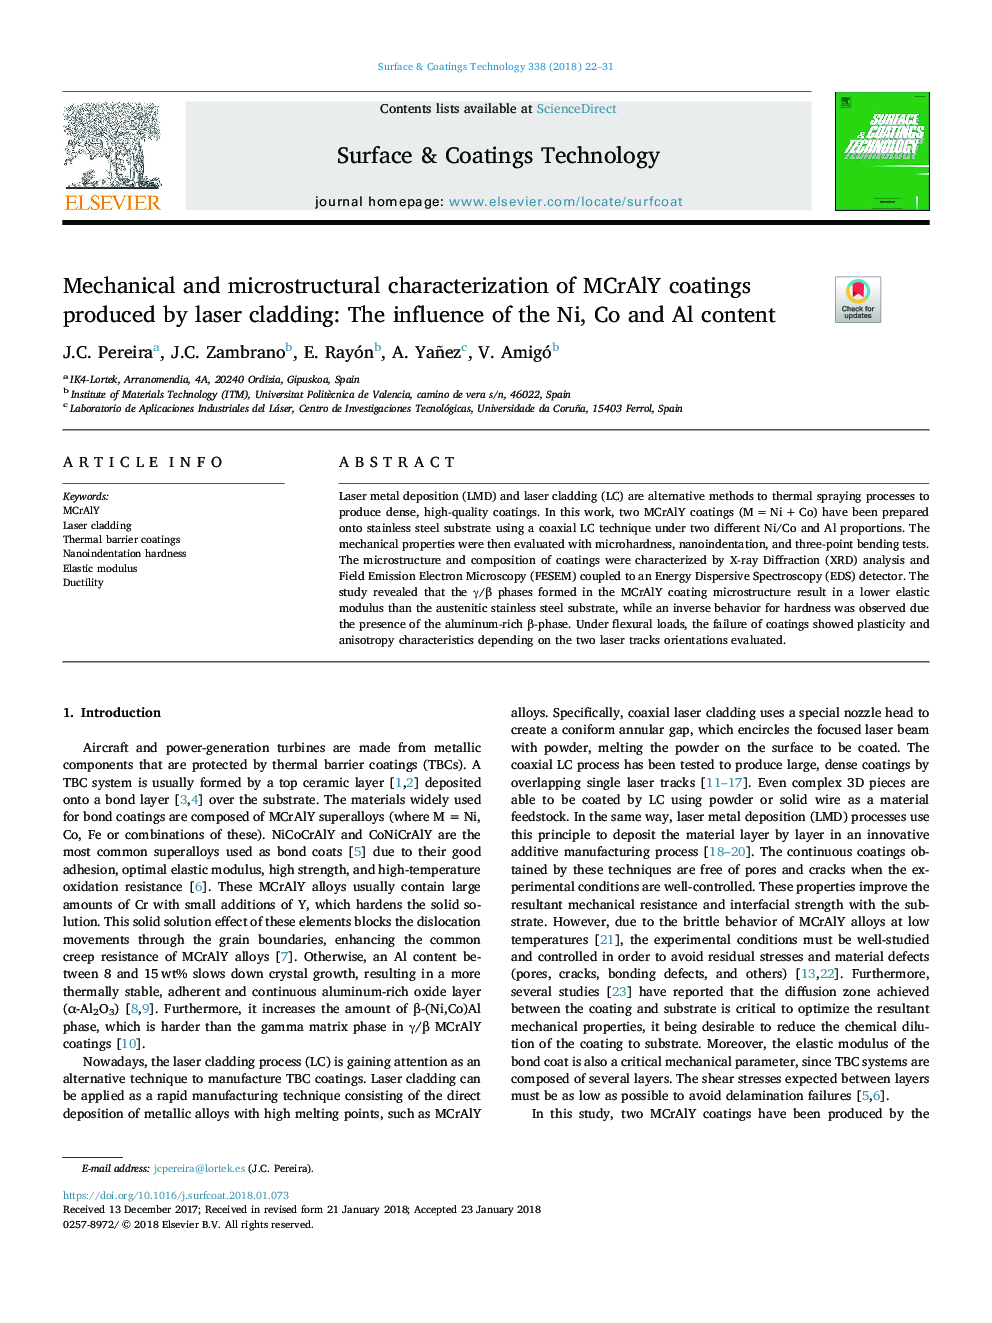 Mechanical and microstructural characterization of MCrAlY coatings produced by laser cladding: The influence of the Ni, Co and Al content